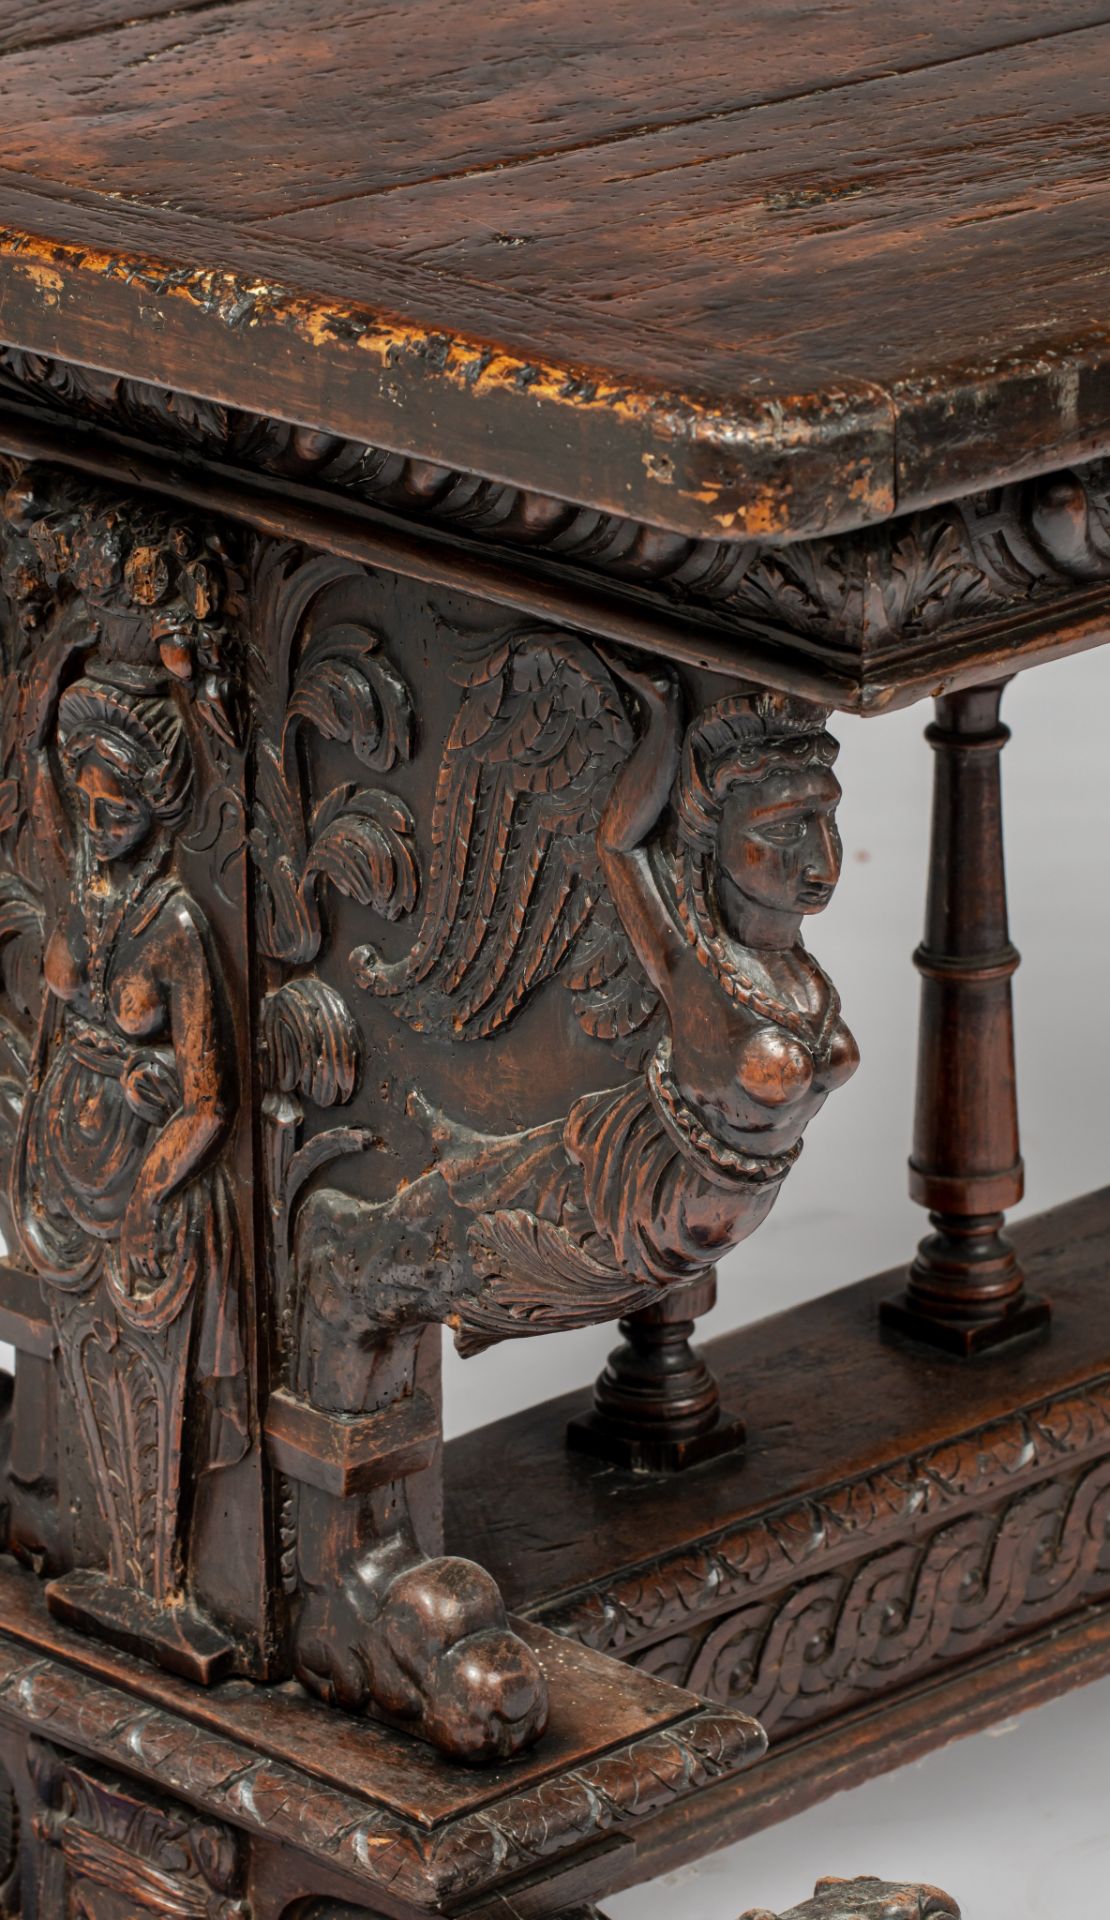 An exceptional Italian Renaissance carved walnut centre table, 16th/17thC, H 82 - W 165 - D 86,5 cm - Image 8 of 12